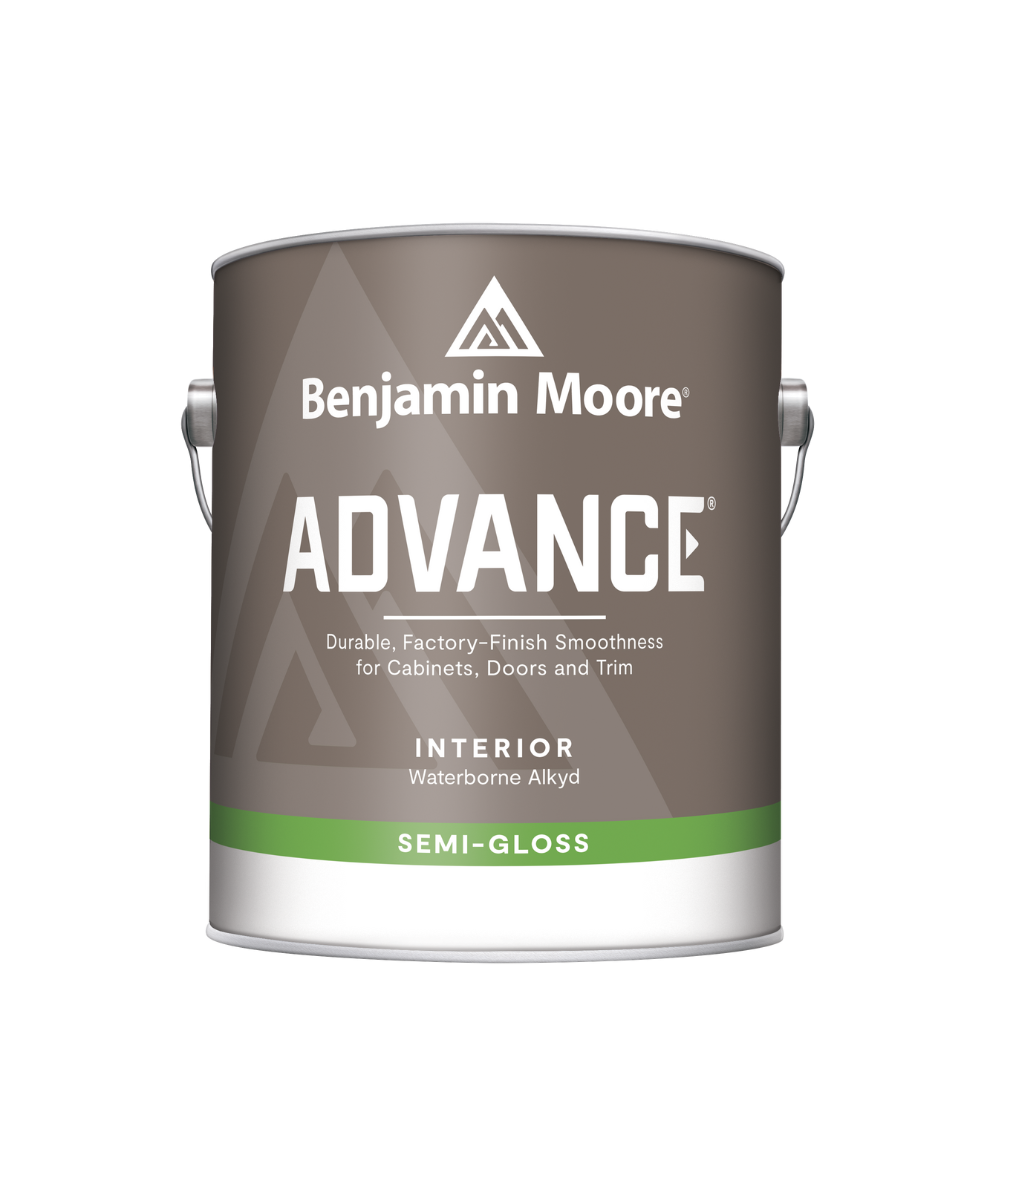 Benjamin Moore Advance Semi Gloss Paint available at JC Licht.